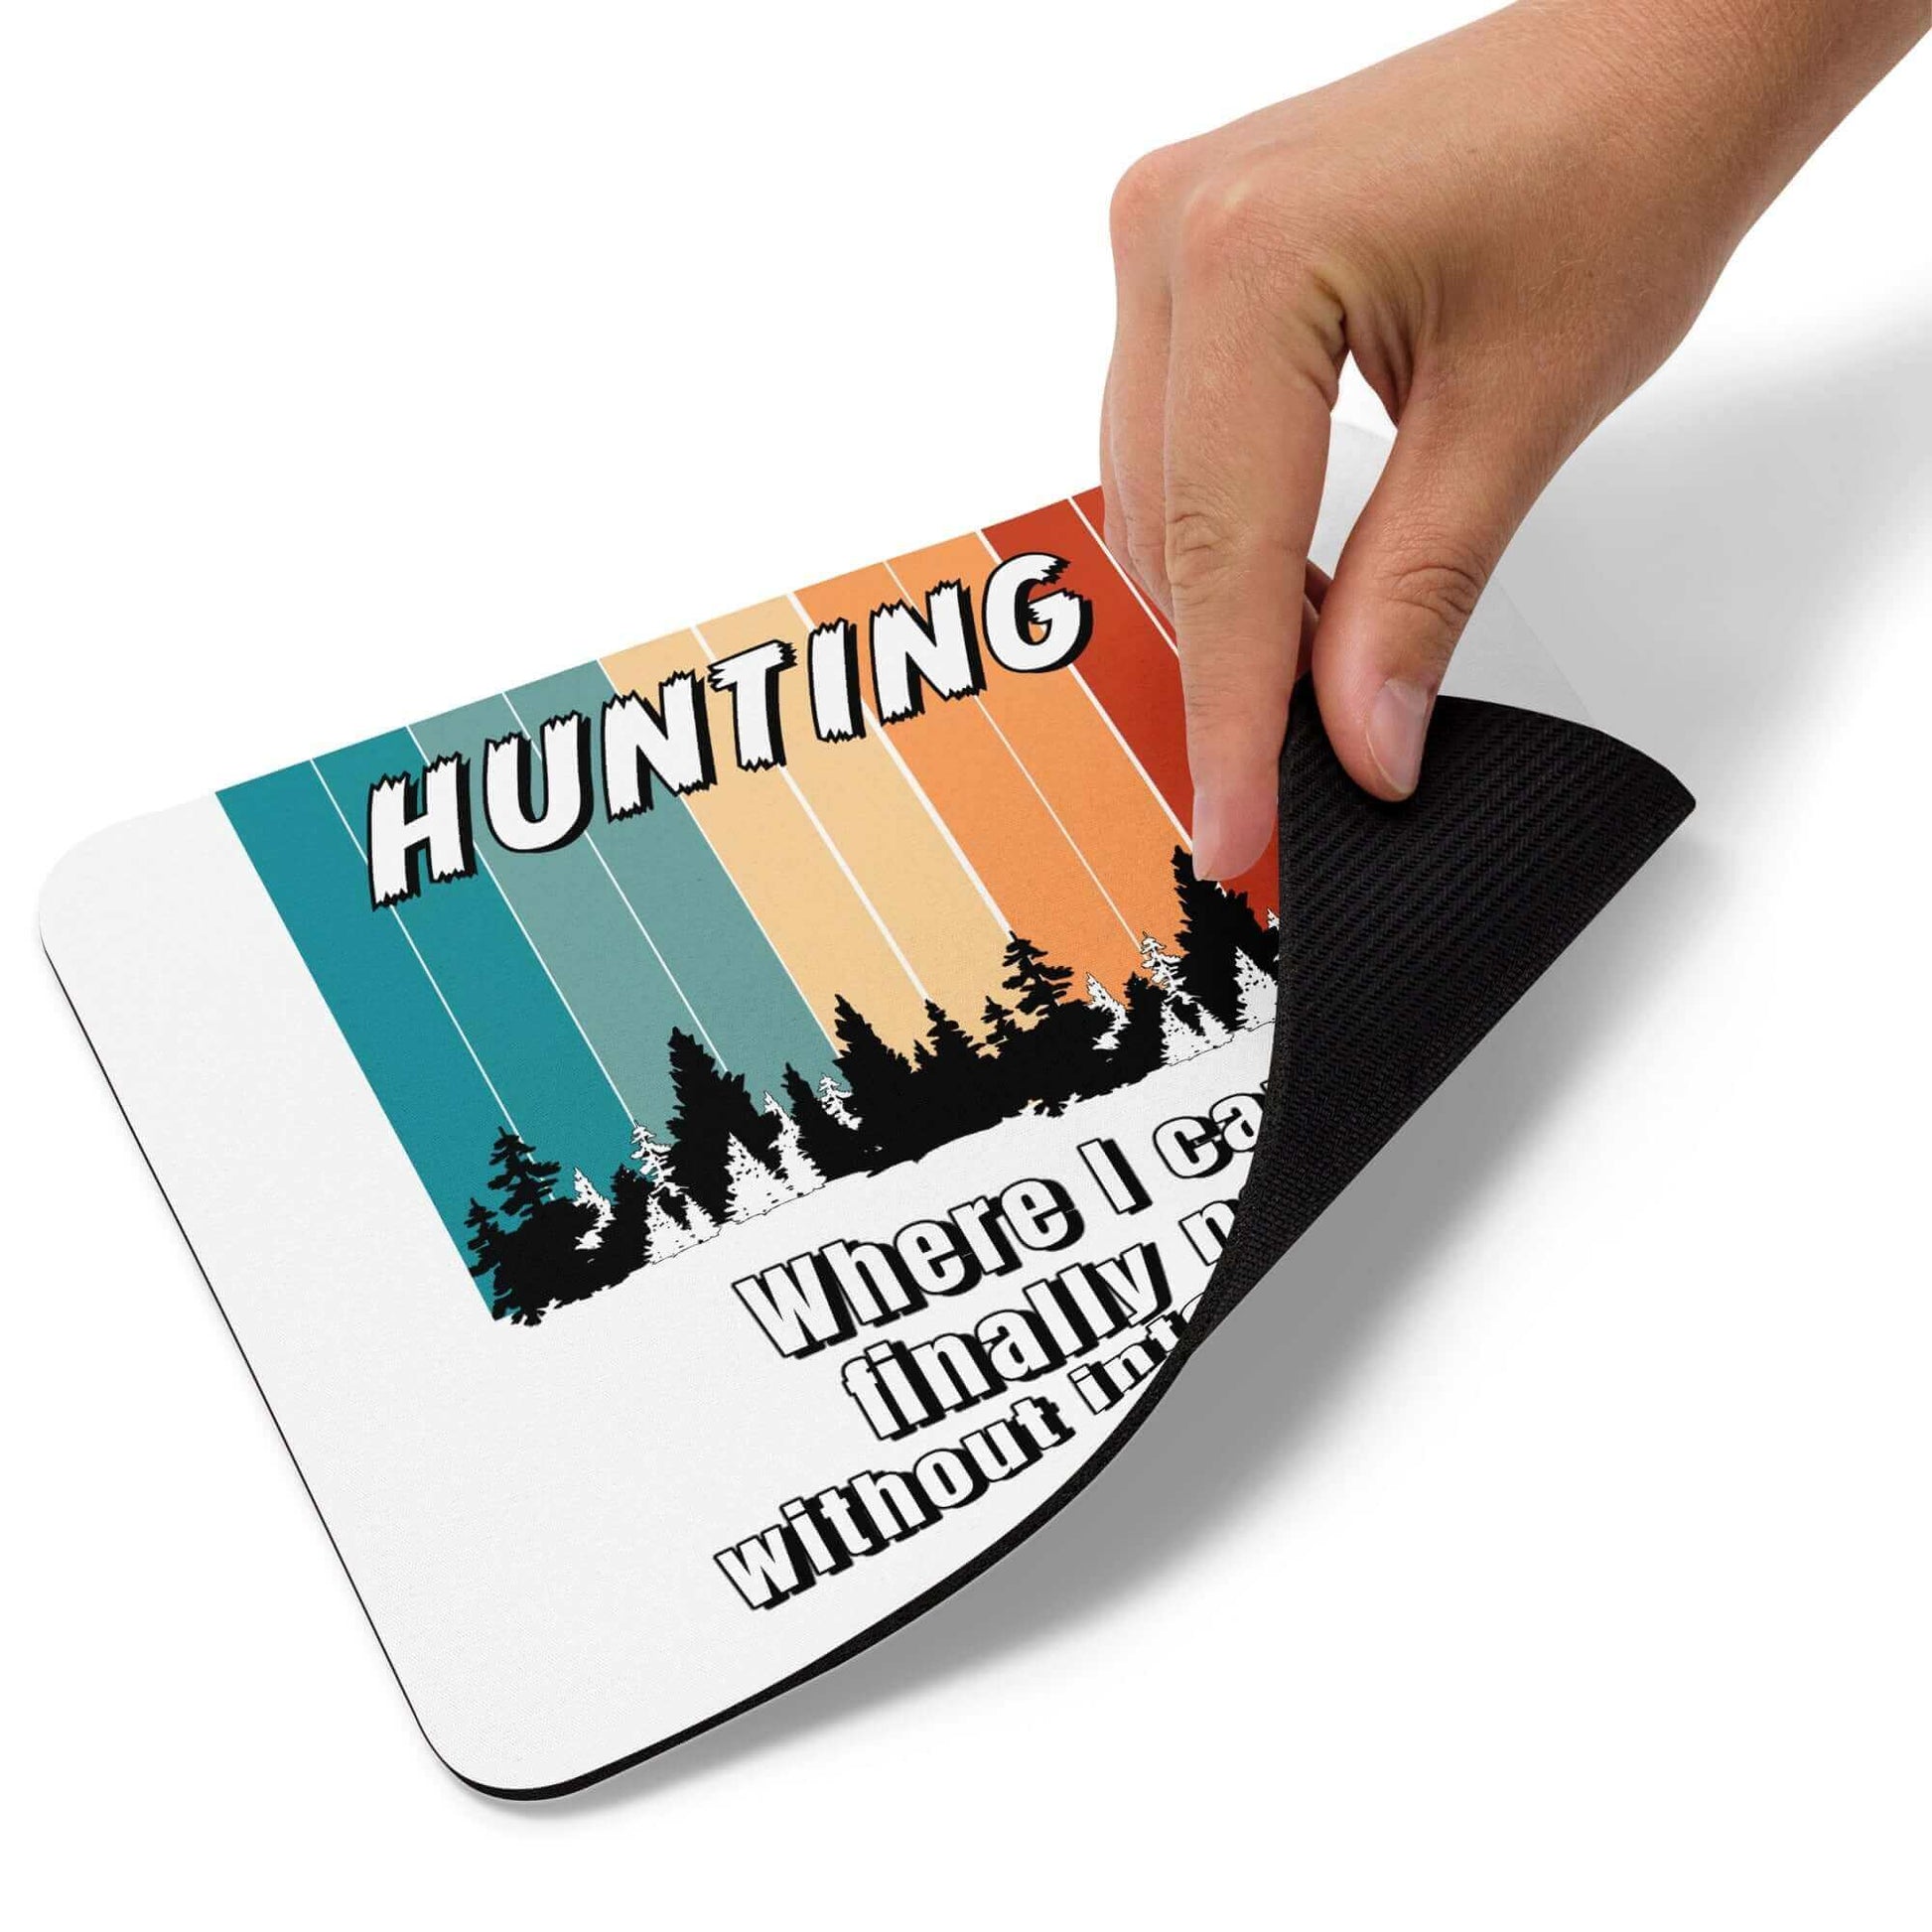 HUNTING - Where I get to nap without interruption - Mouse pad funny mouse pad hunting mouse pad nap sleep